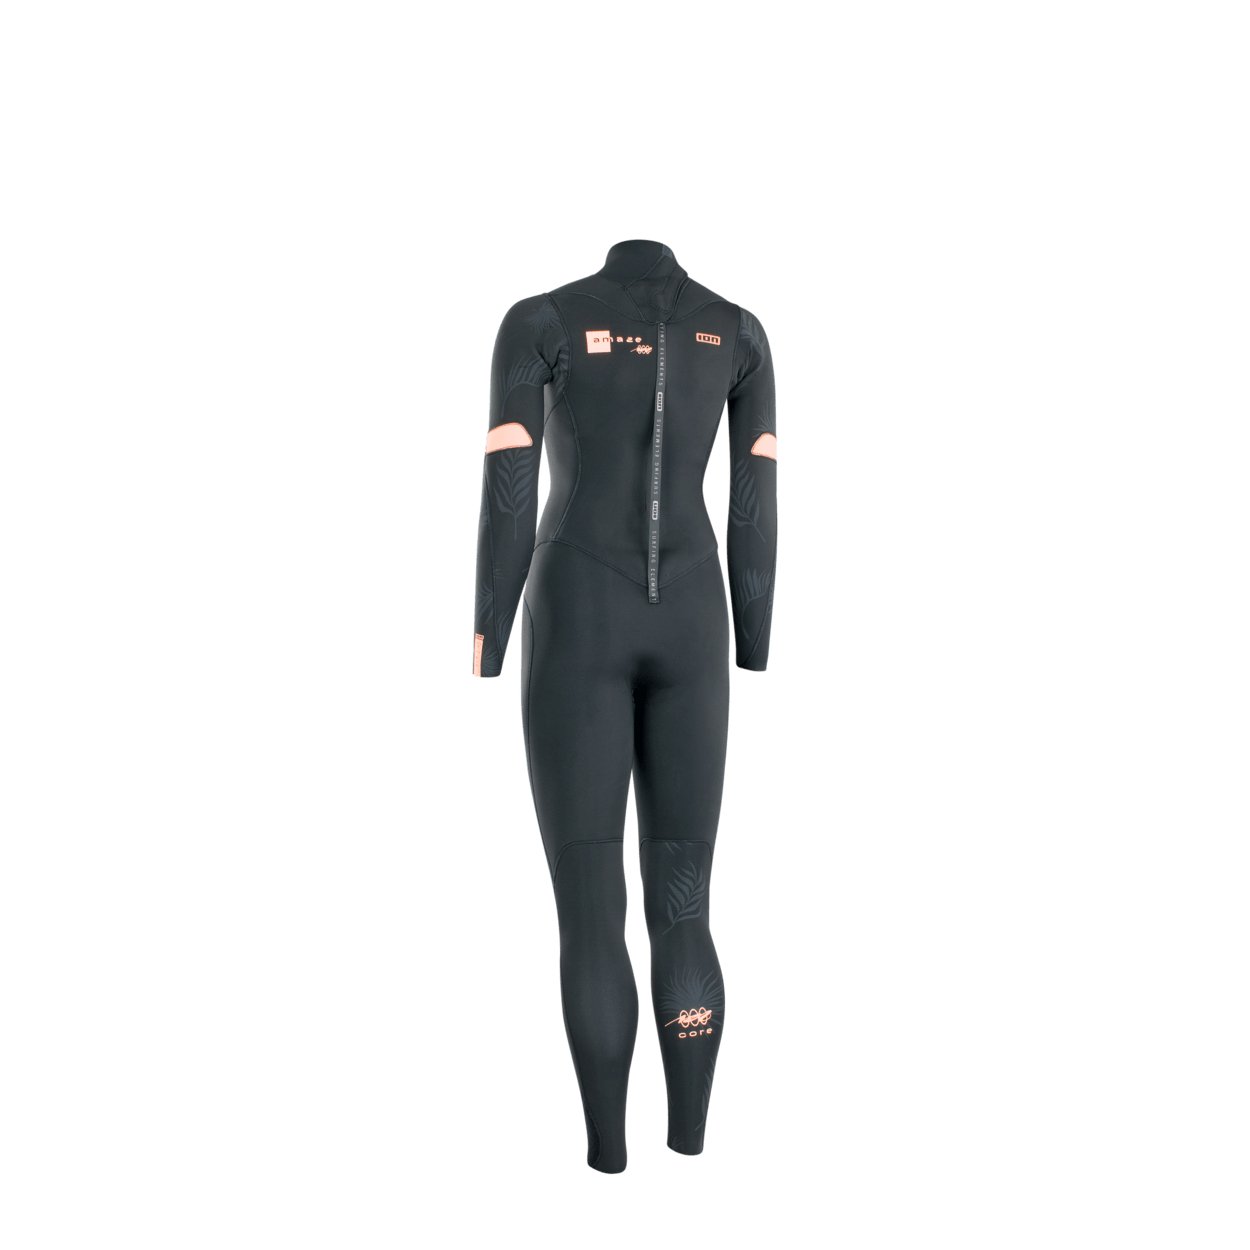 ION Amaze Core 5/4 Back Zip 2022 - Worthing Watersports - 9010583057569 - Wetsuits - ION Water